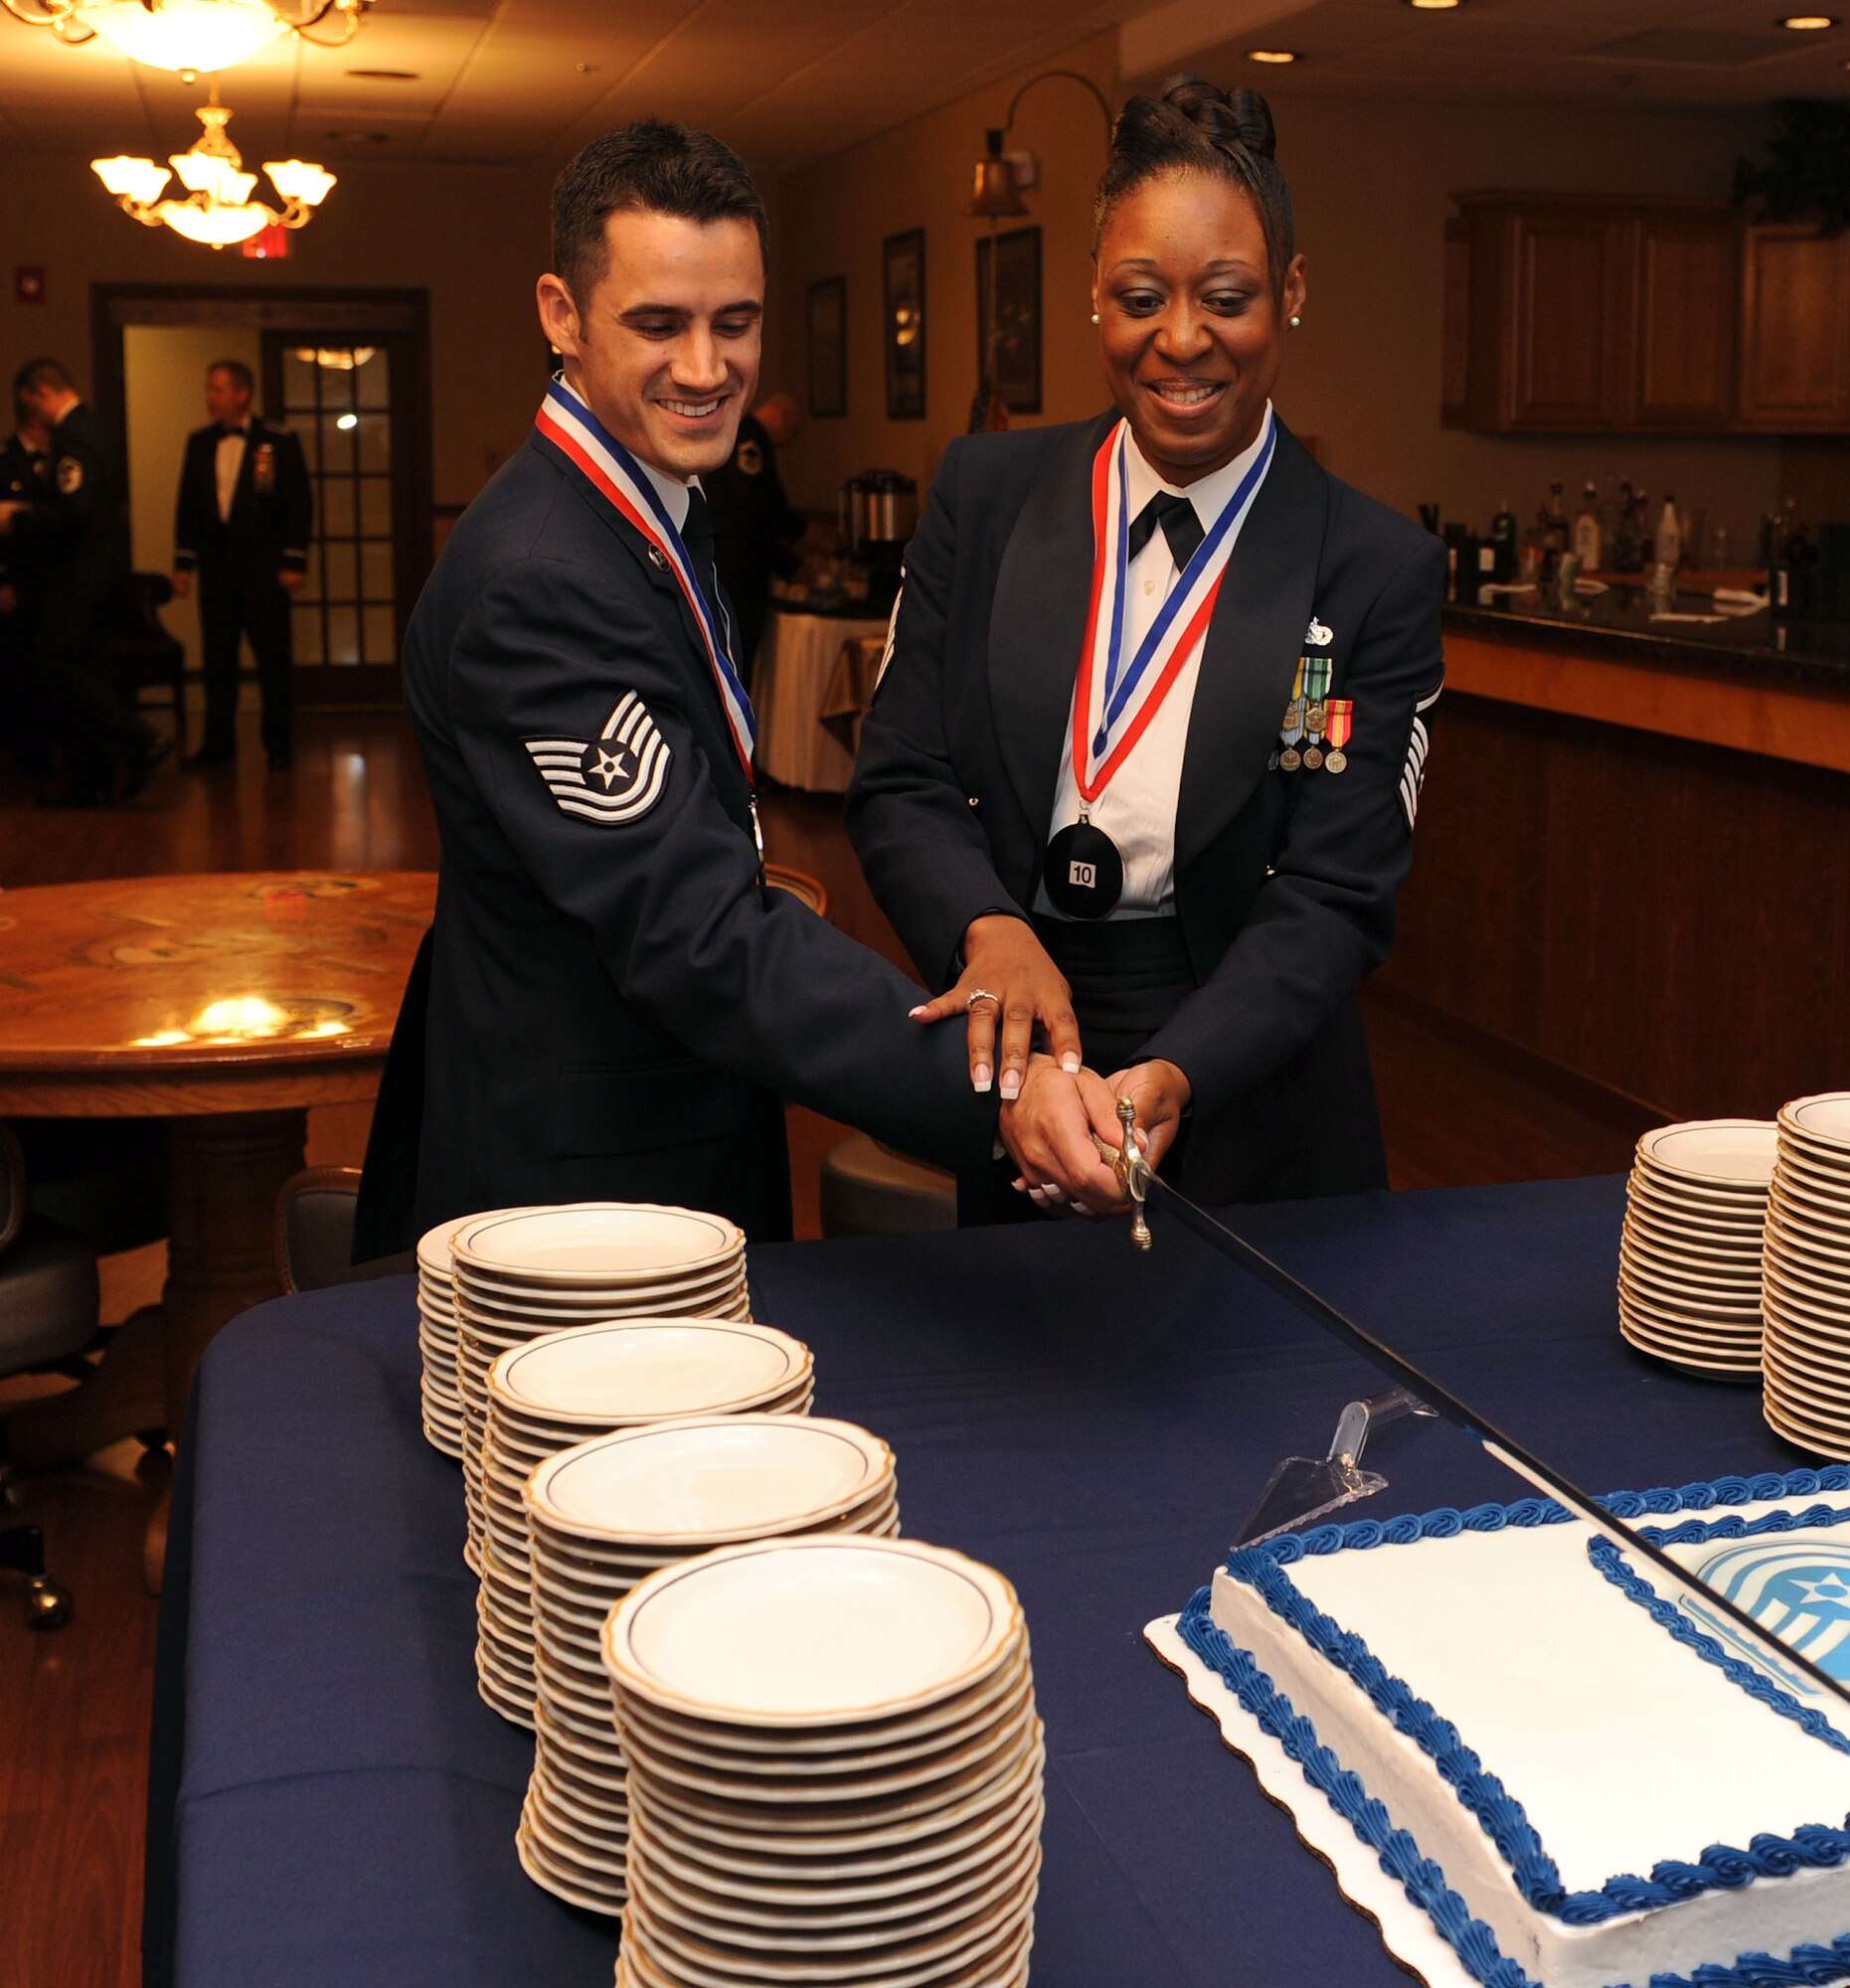 Master Sgt. Natasha Thomas, a 314th Aircraft Maintenance Squadron inductee, and Tech. Sgt. Parker Alford, a 19th Logistics Readiness inductee, prepare to cut the cake at the Senior NCO Induction Ceremony Aug. 13 at Hangar 1080. Sergeant Thomas was the senior ranking inductee present and Sergeant Alford had the highest line number of the inductees. (U.S. Air Force photo by Senior Airman Steele C. G. Britton)